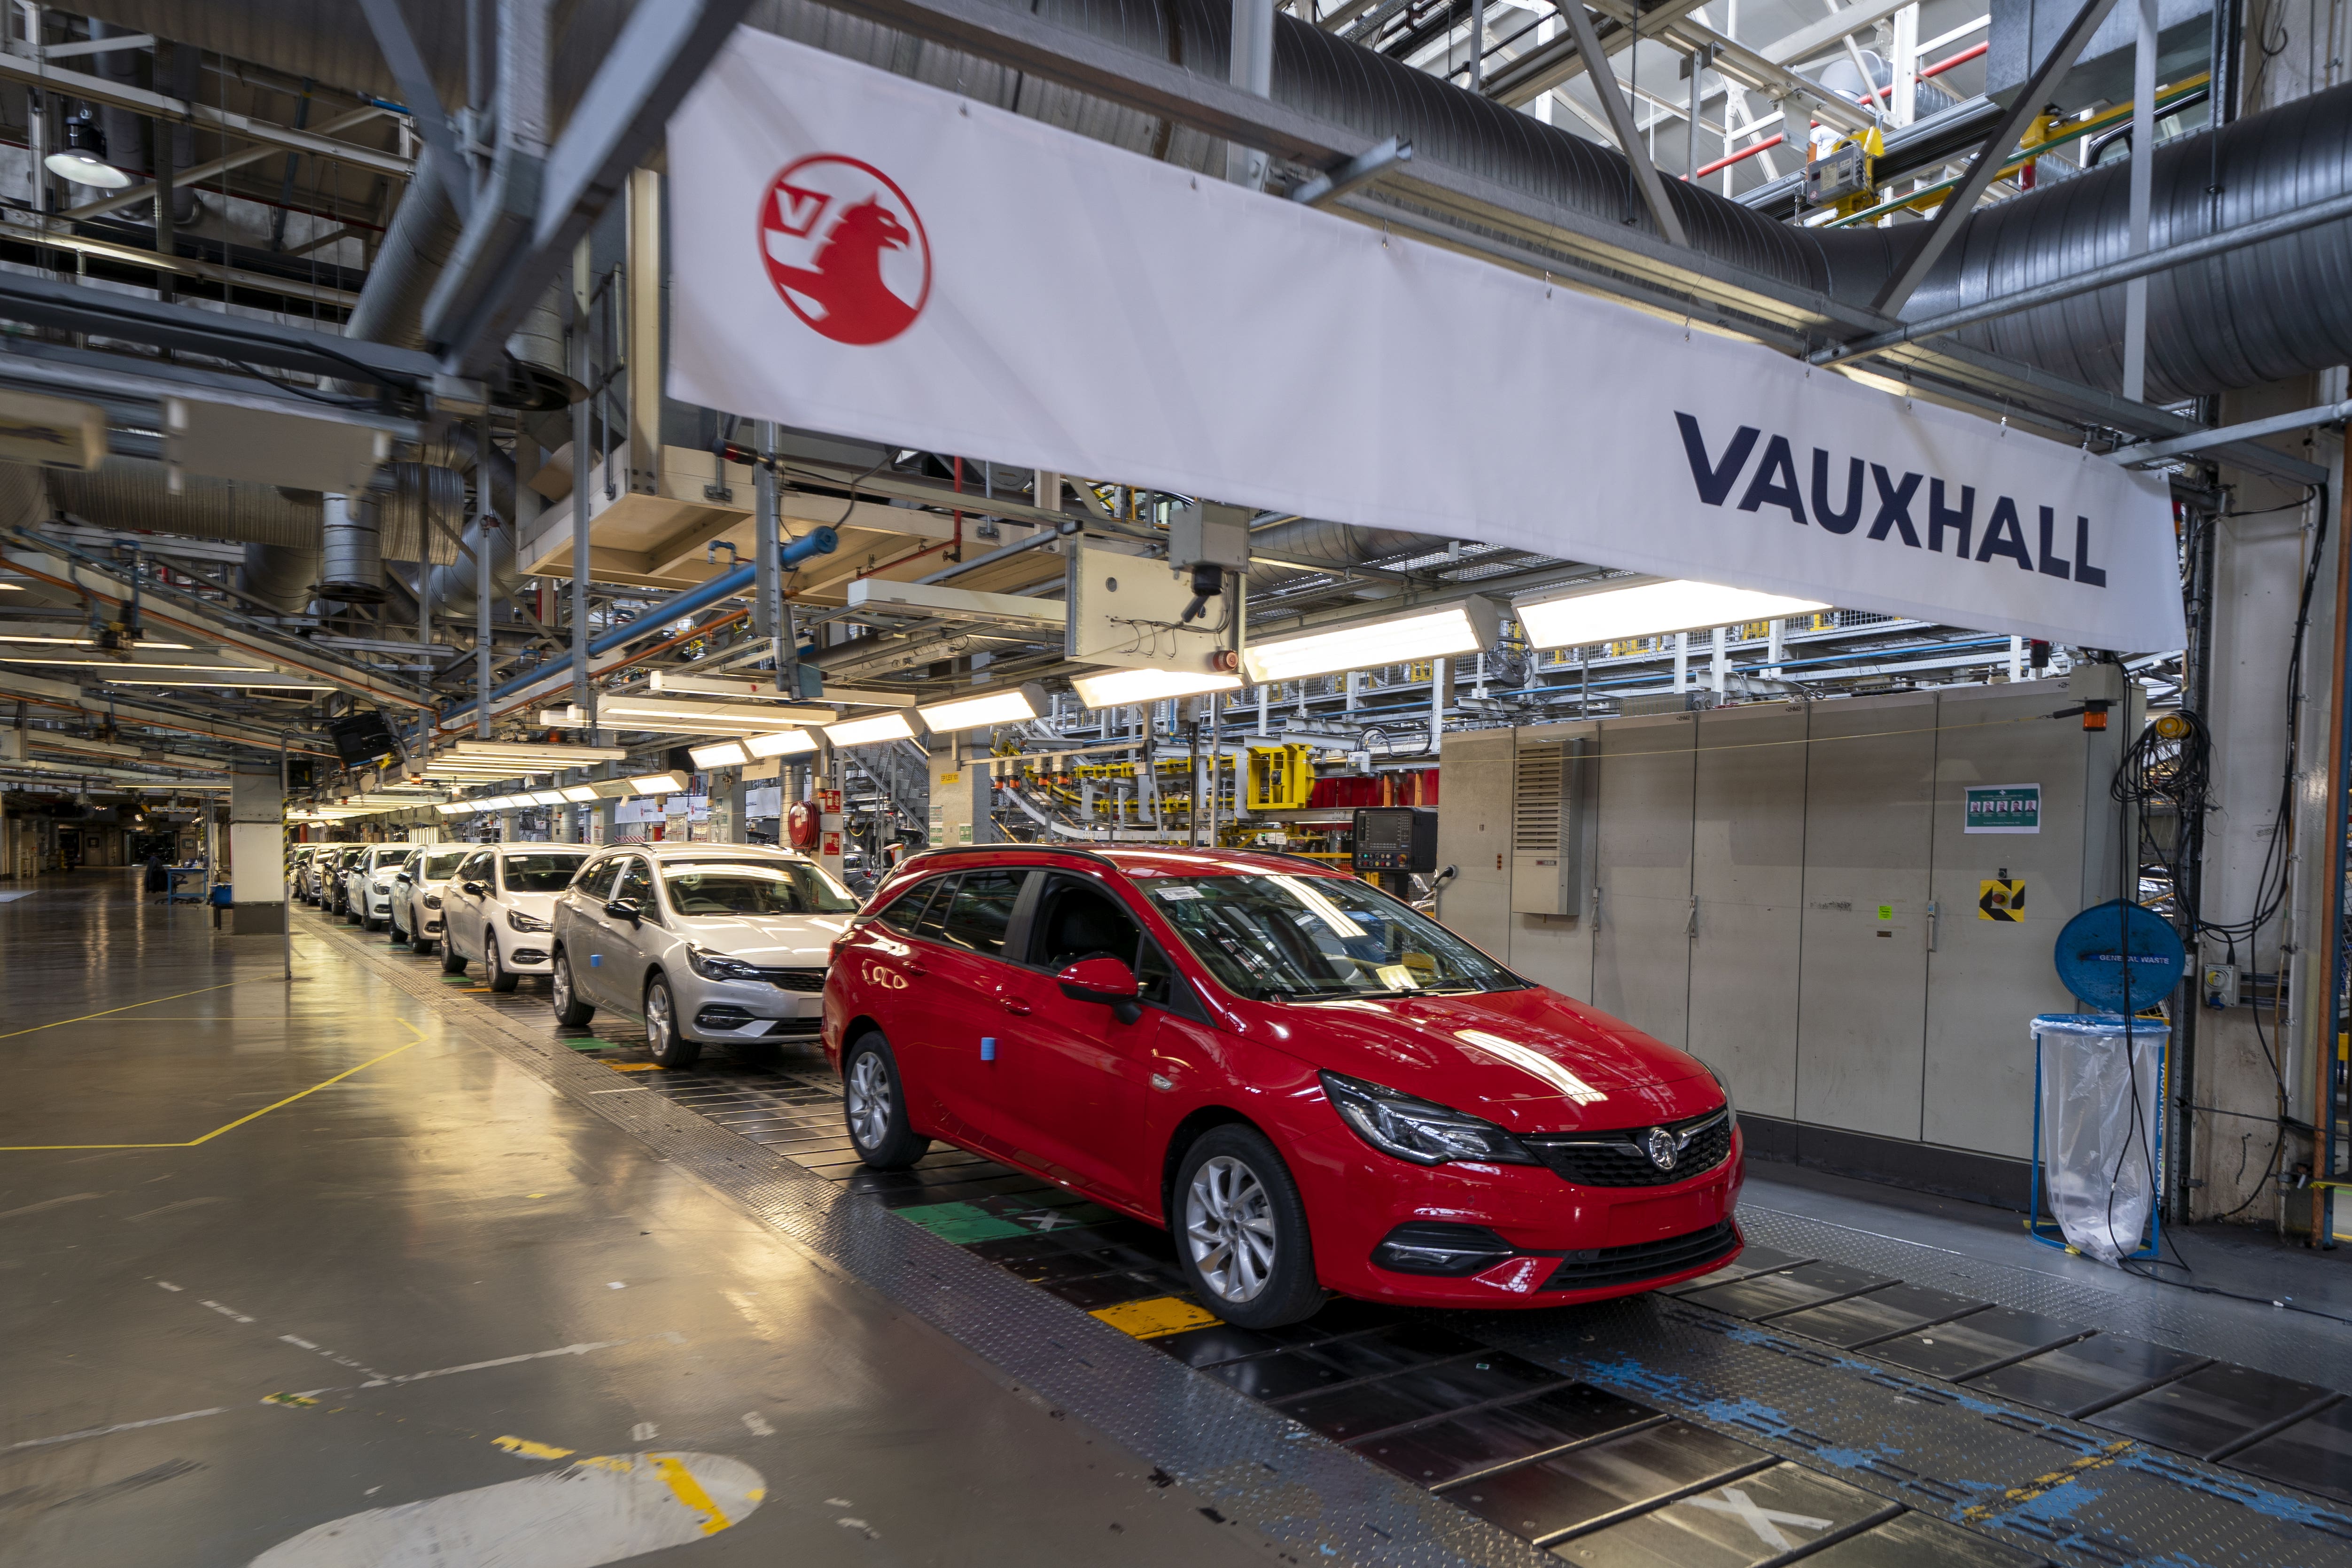 Vauxhall’s parent company Stellantis told MPs it will be unable to keep a commitment to make electric vehicles in the UK without changes to the Trade and Cooperation Agreement with the EU